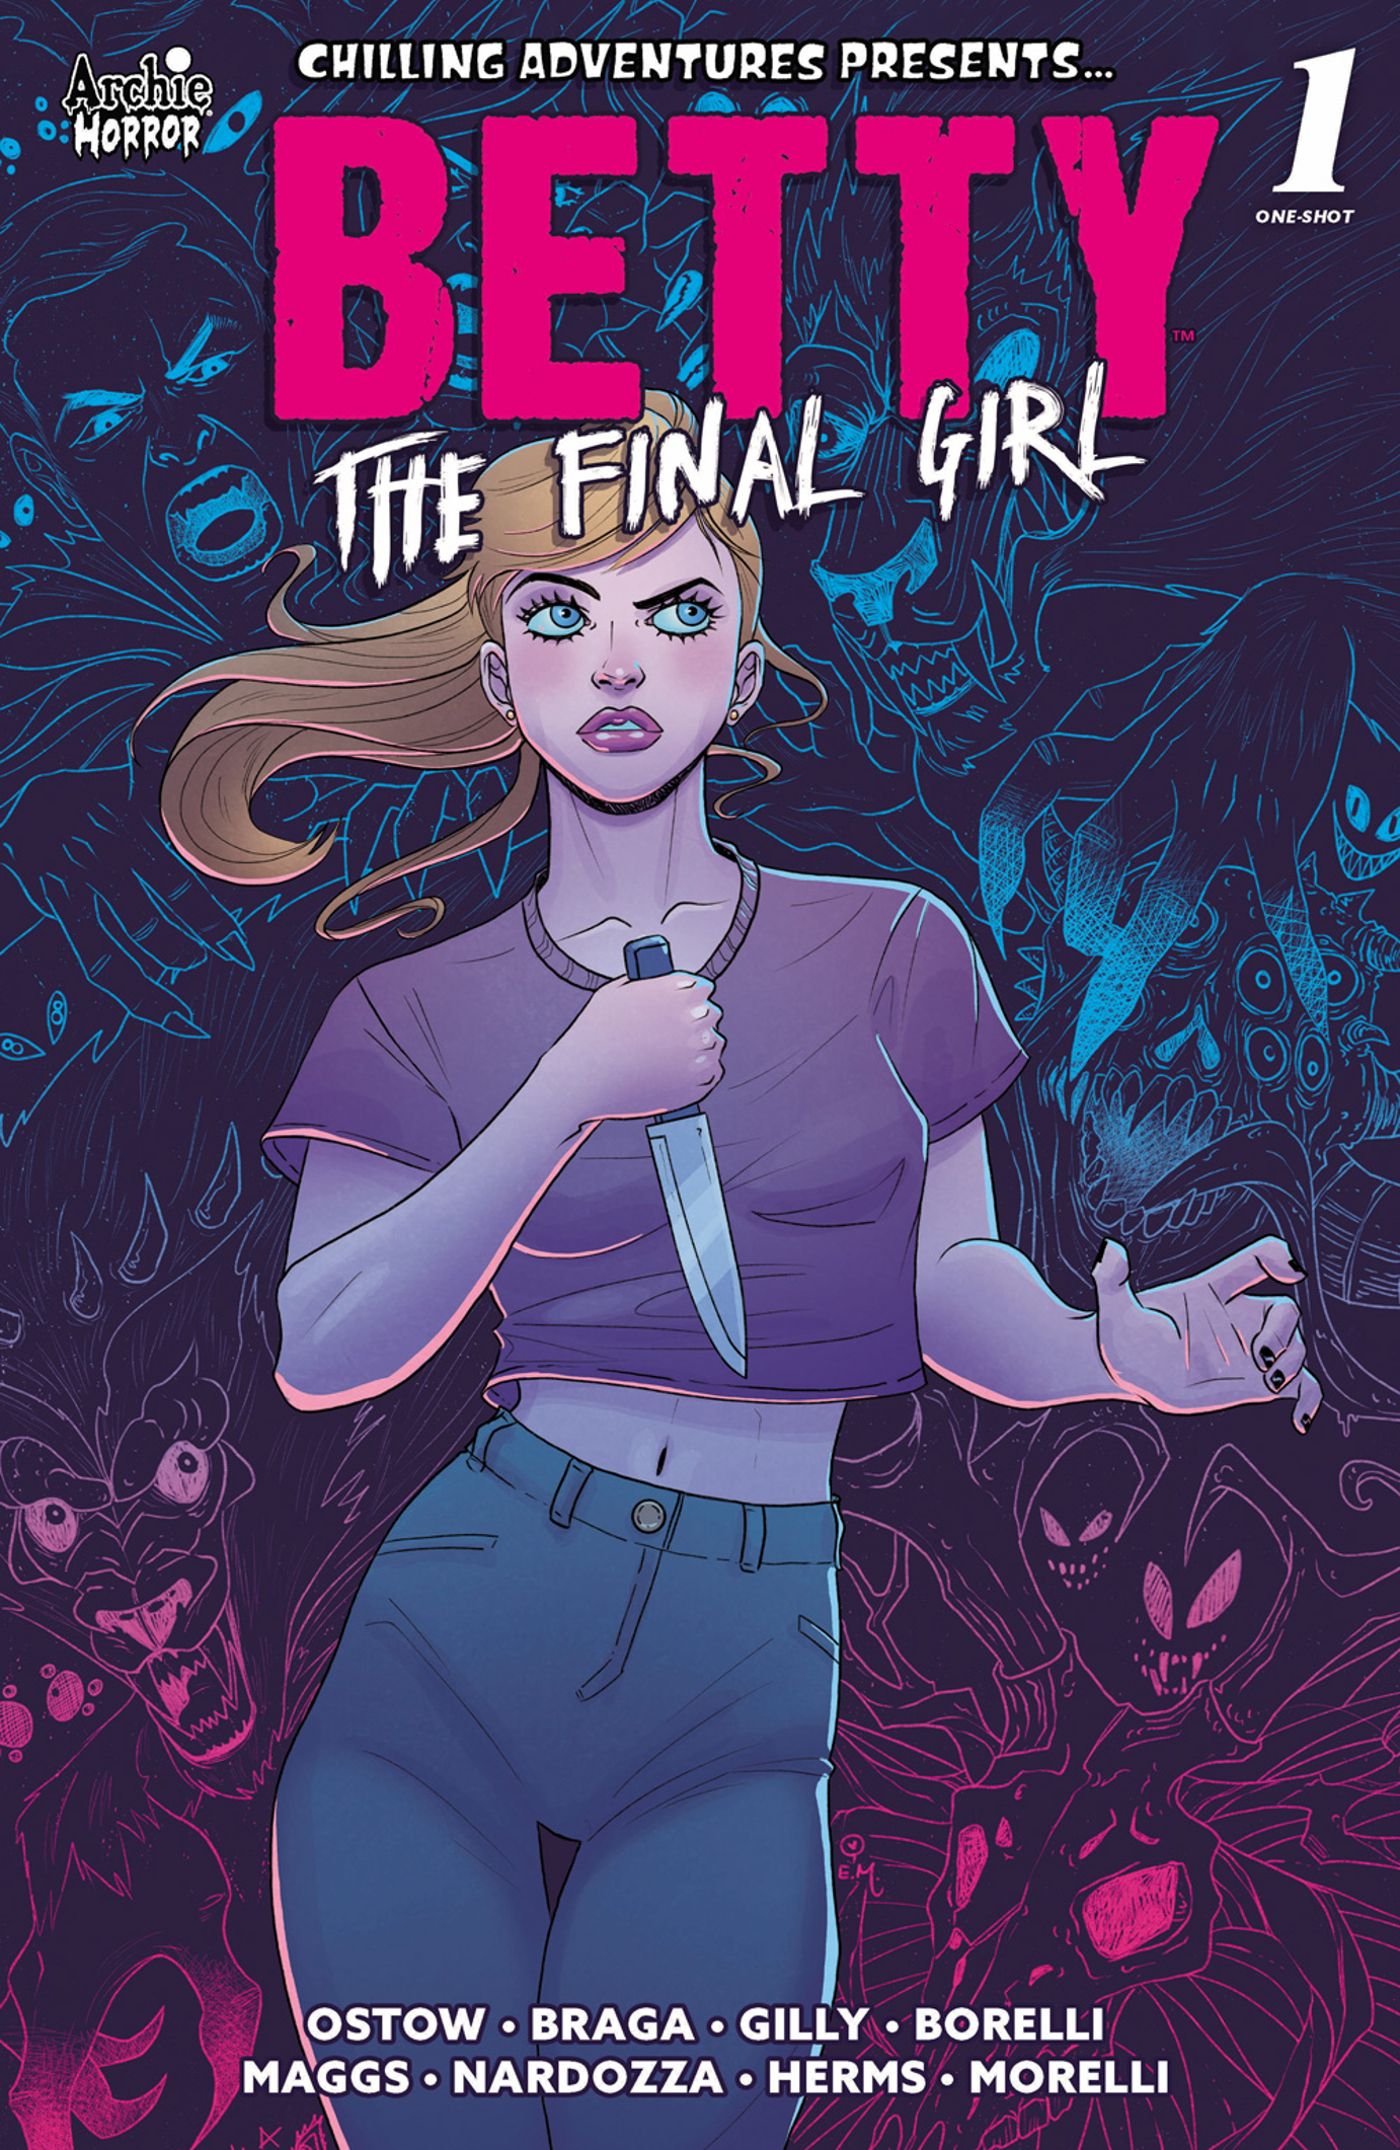 chilling adventures presents betty the final girl 1 b